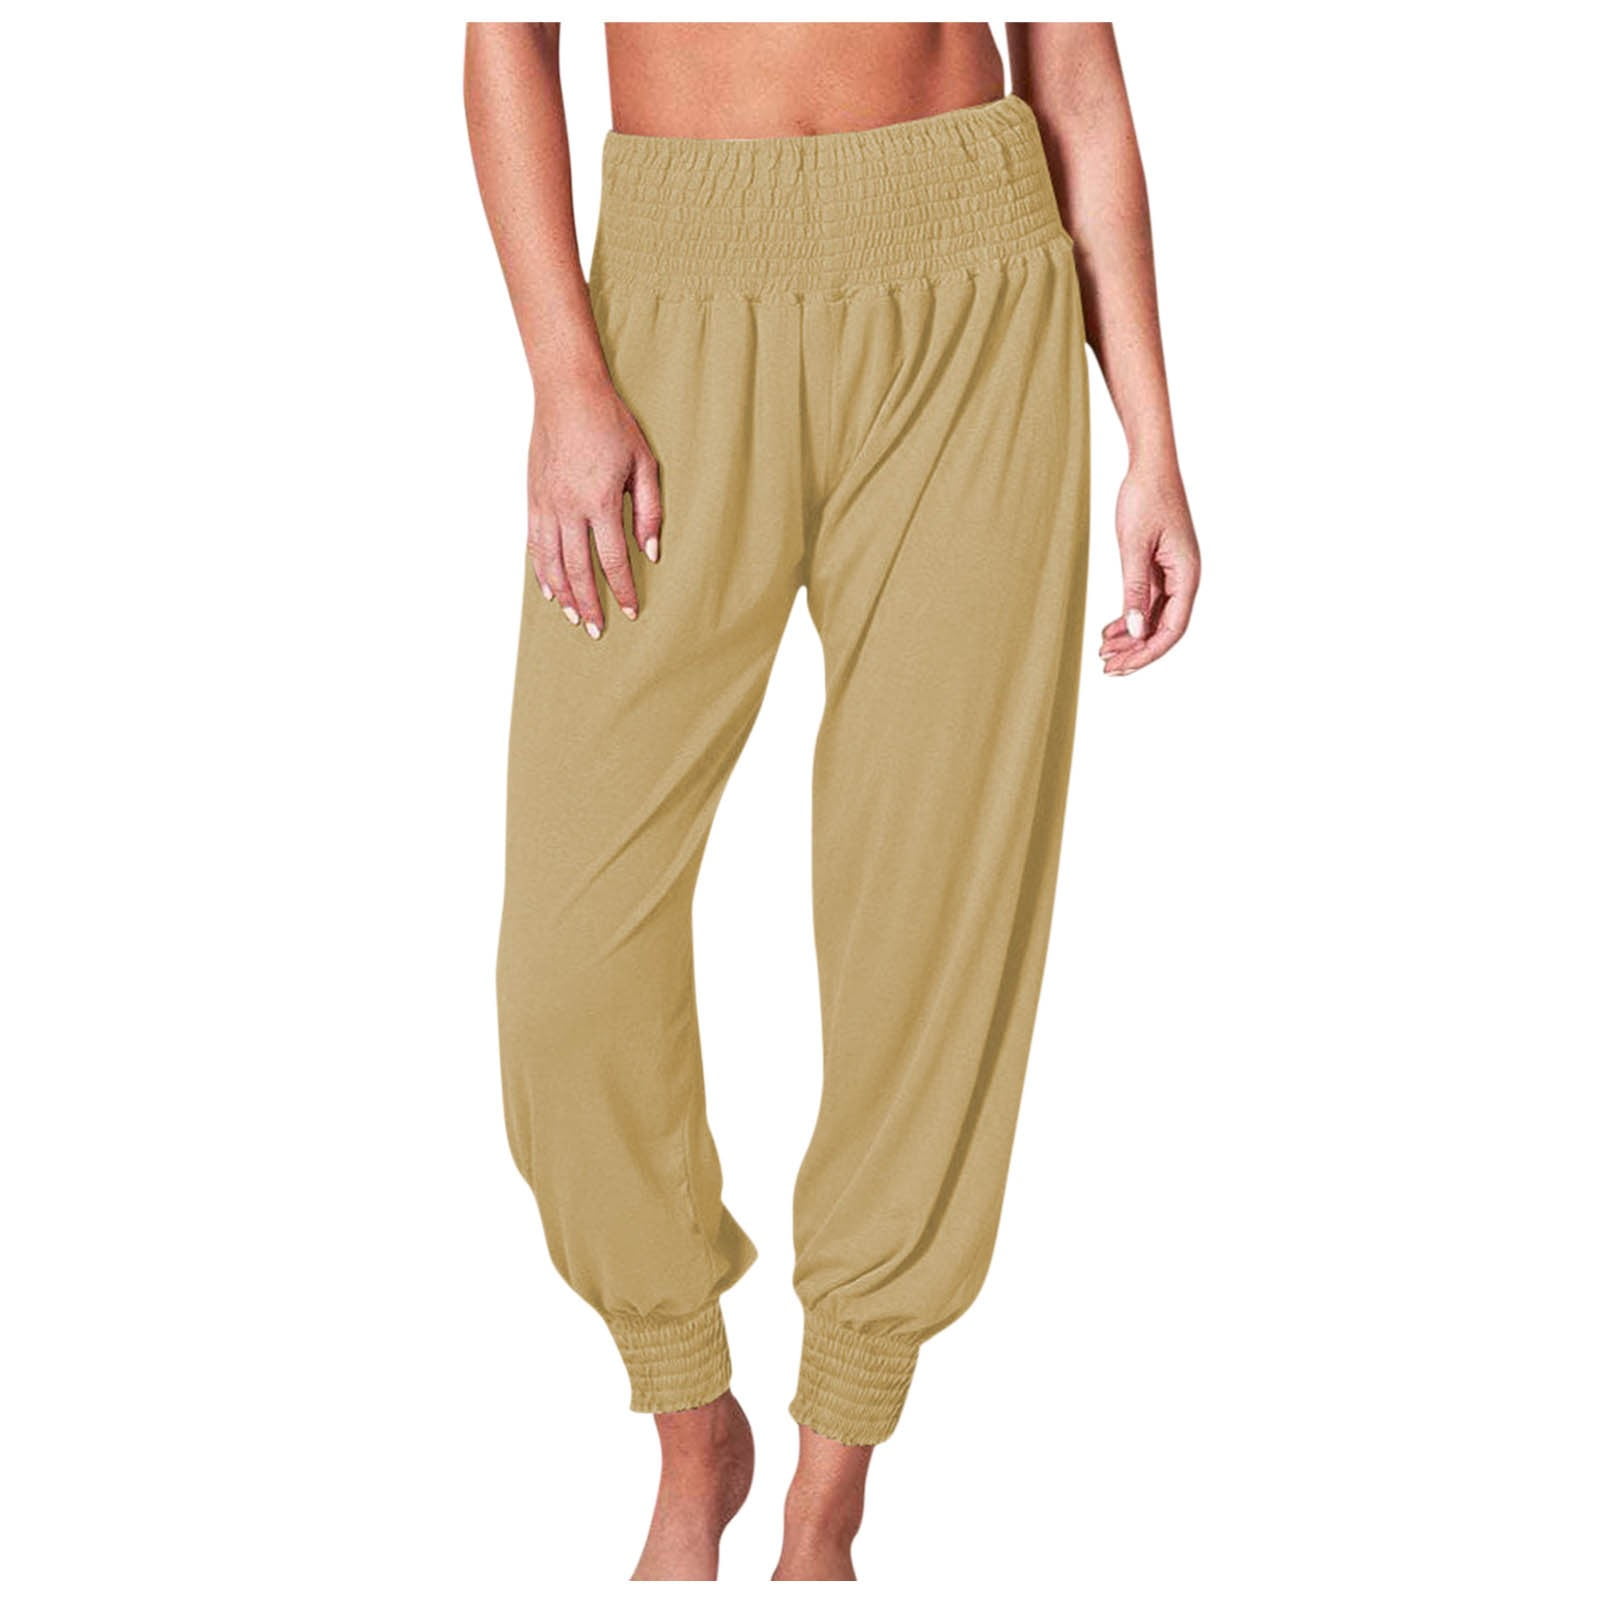 Clearance Under $10 ! BVnarty Discount Harem Pants for Women Fashion Fall  Winter Long Trousers Harron Elastic Mid Waist Sports Fold Solid Color Comfy